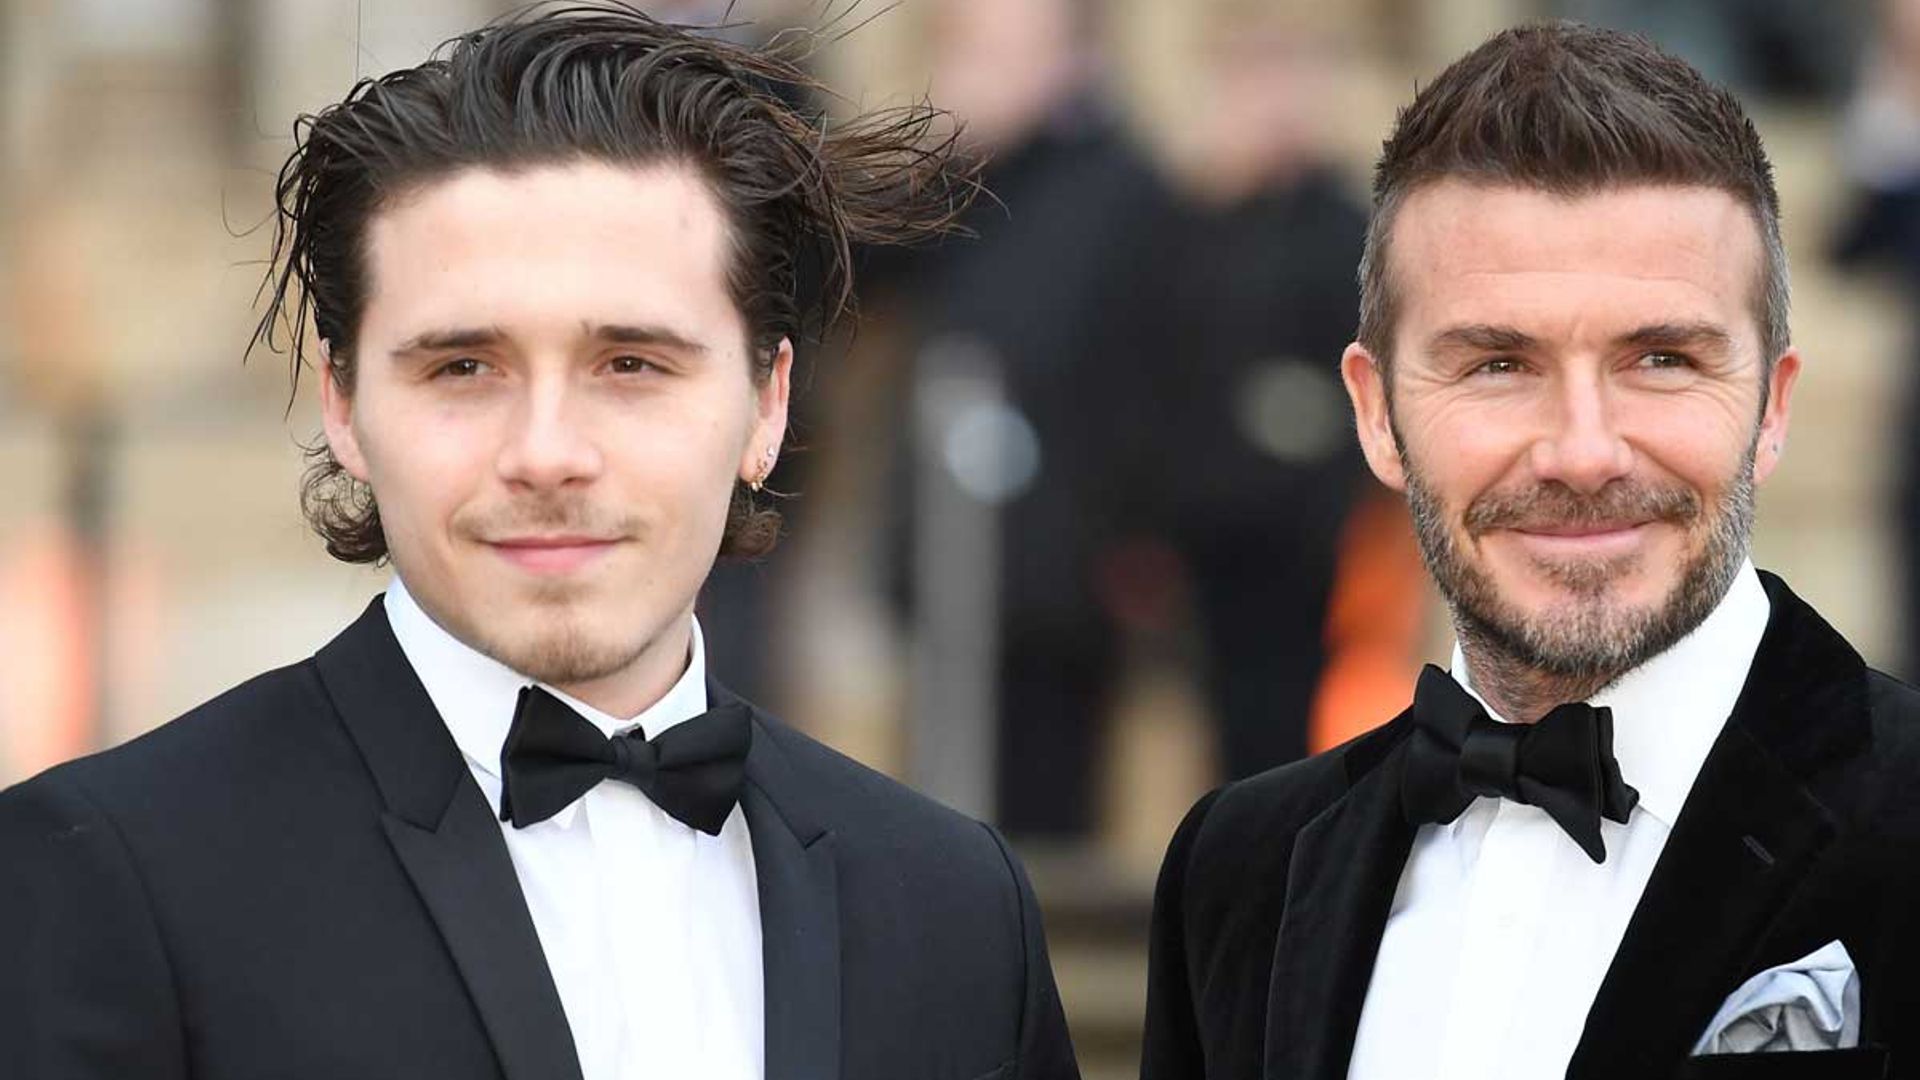 Brooklyn Beckham's unusual breakfast hack will divide the nation – see video